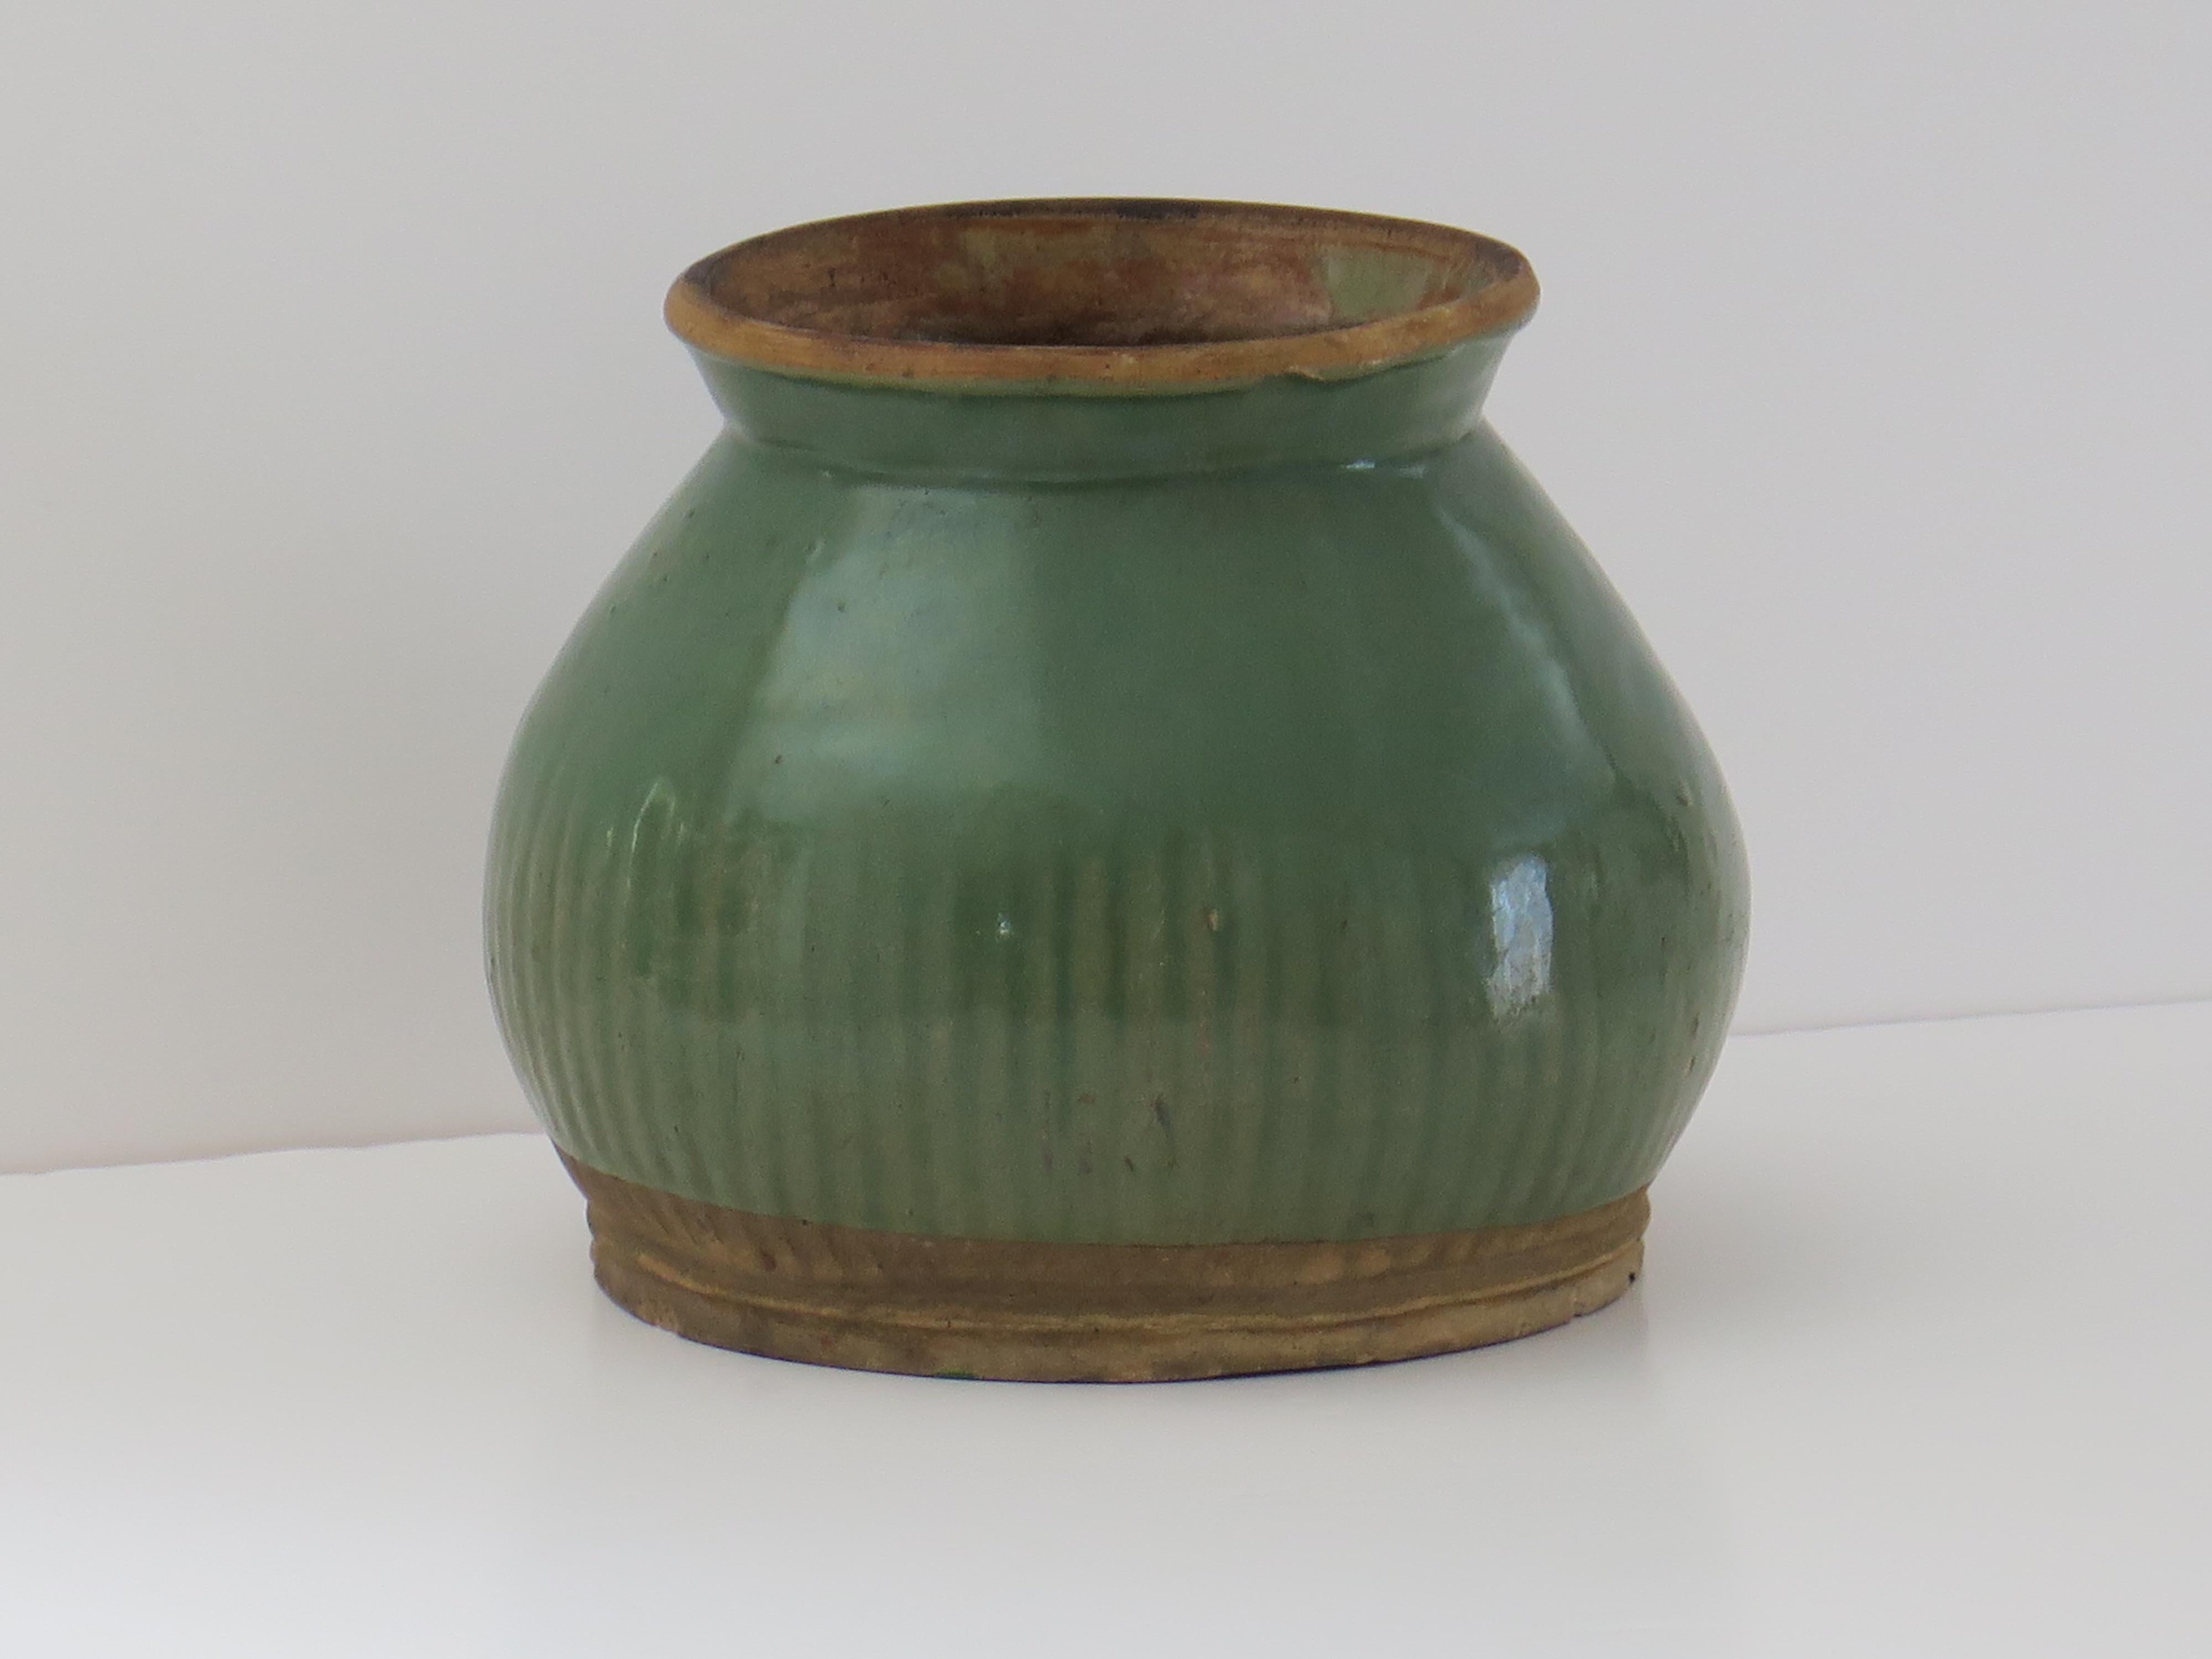 This is a very old interesting provincial Chinese stoneware Celadon Jar, probably Longquan,  with fluted or ribbed decoration, which we date to the Ming Dynasty, between the 14th and 16th Centuries.

The Jar has an interesting circular baluster